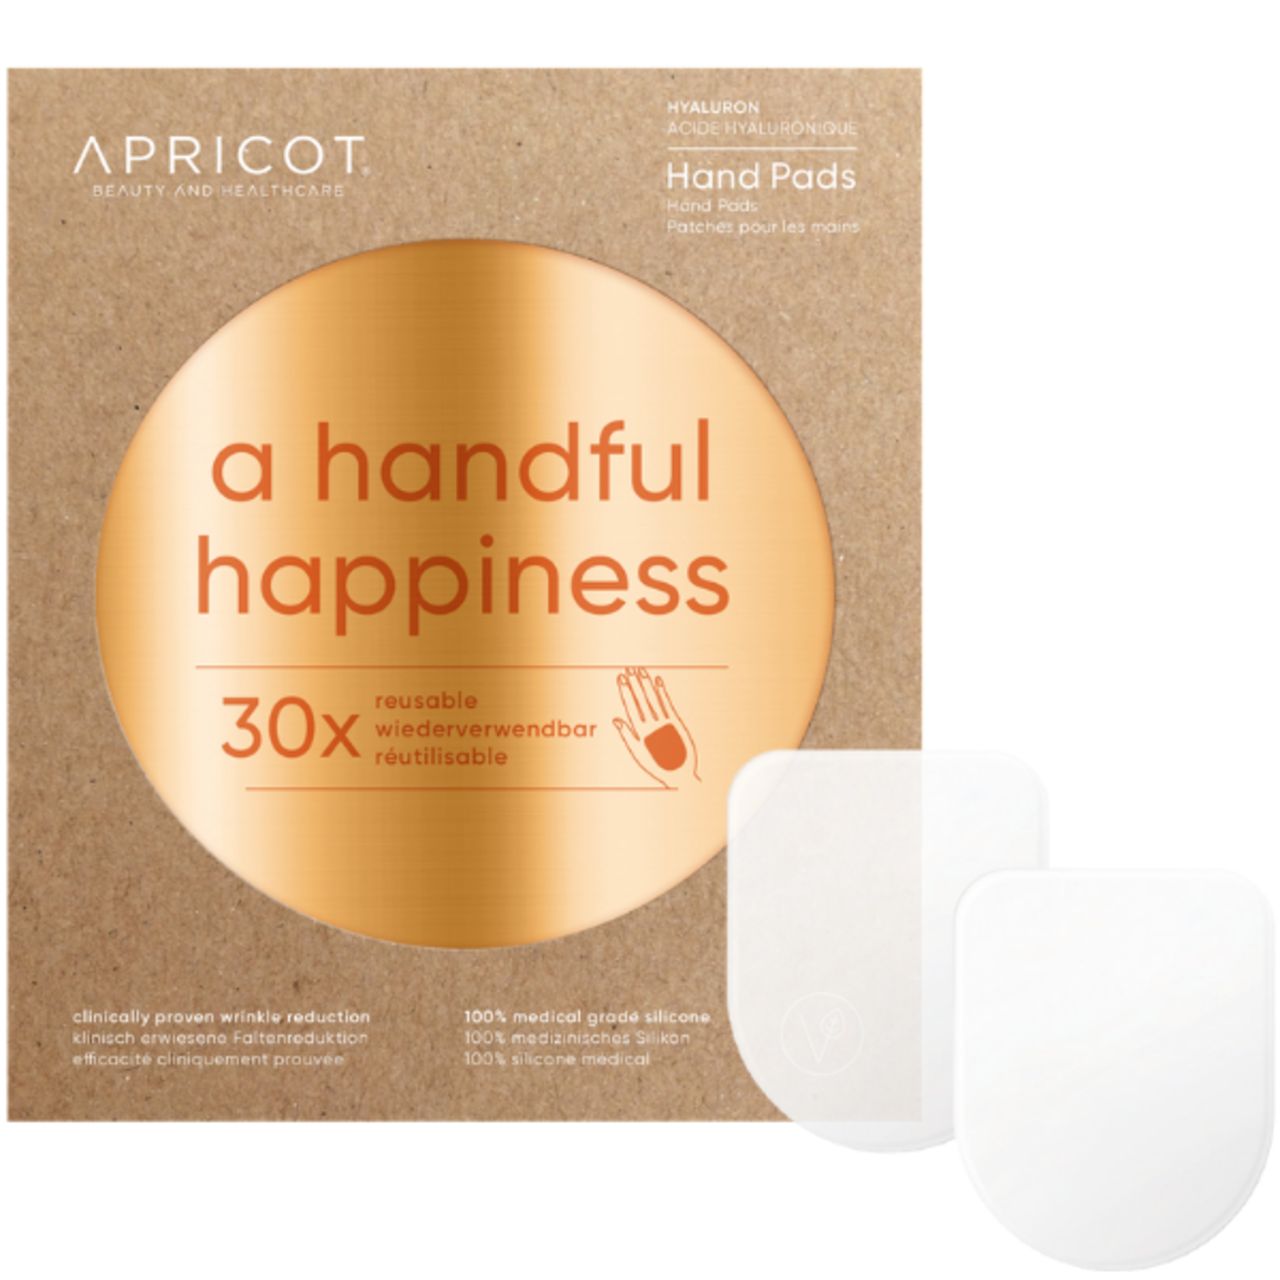 Apricot, Hand Pads Hyaluron